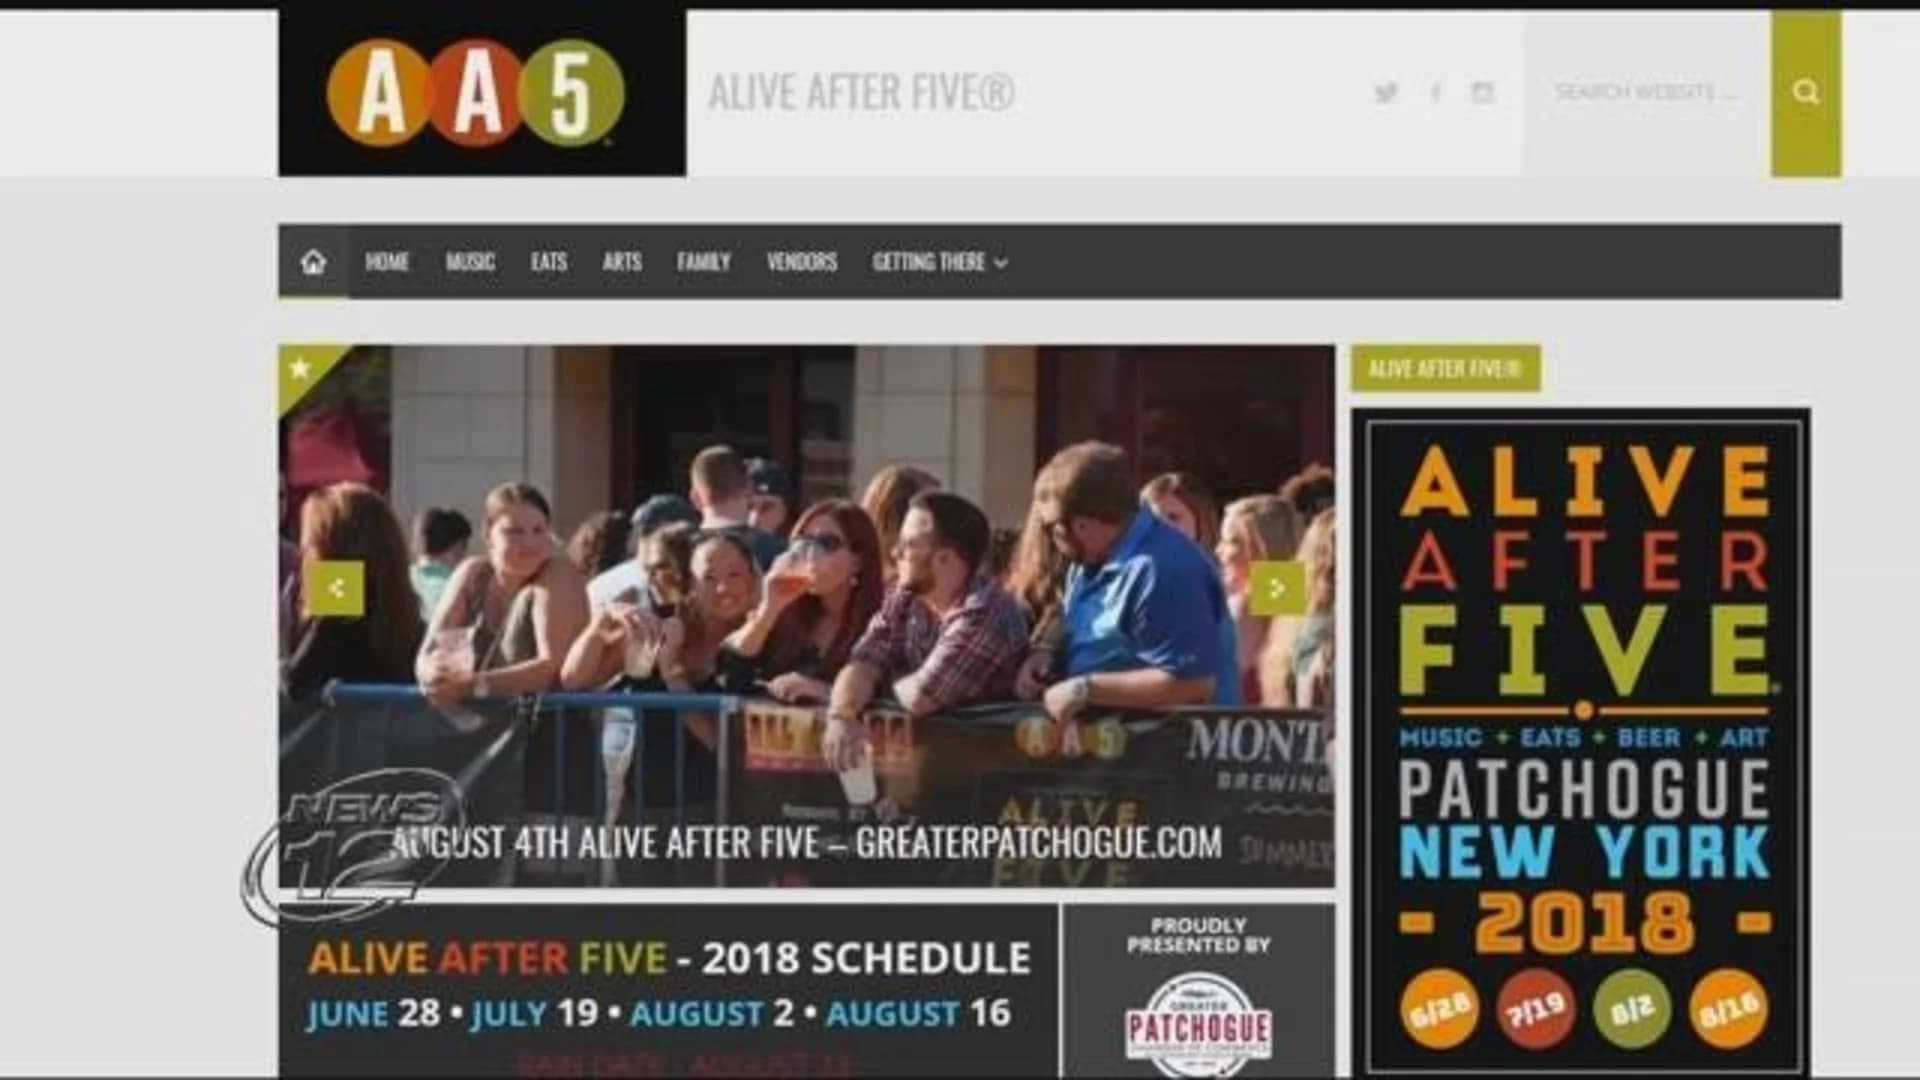 First Alive After Five of season in Patchogue canceled due to weather